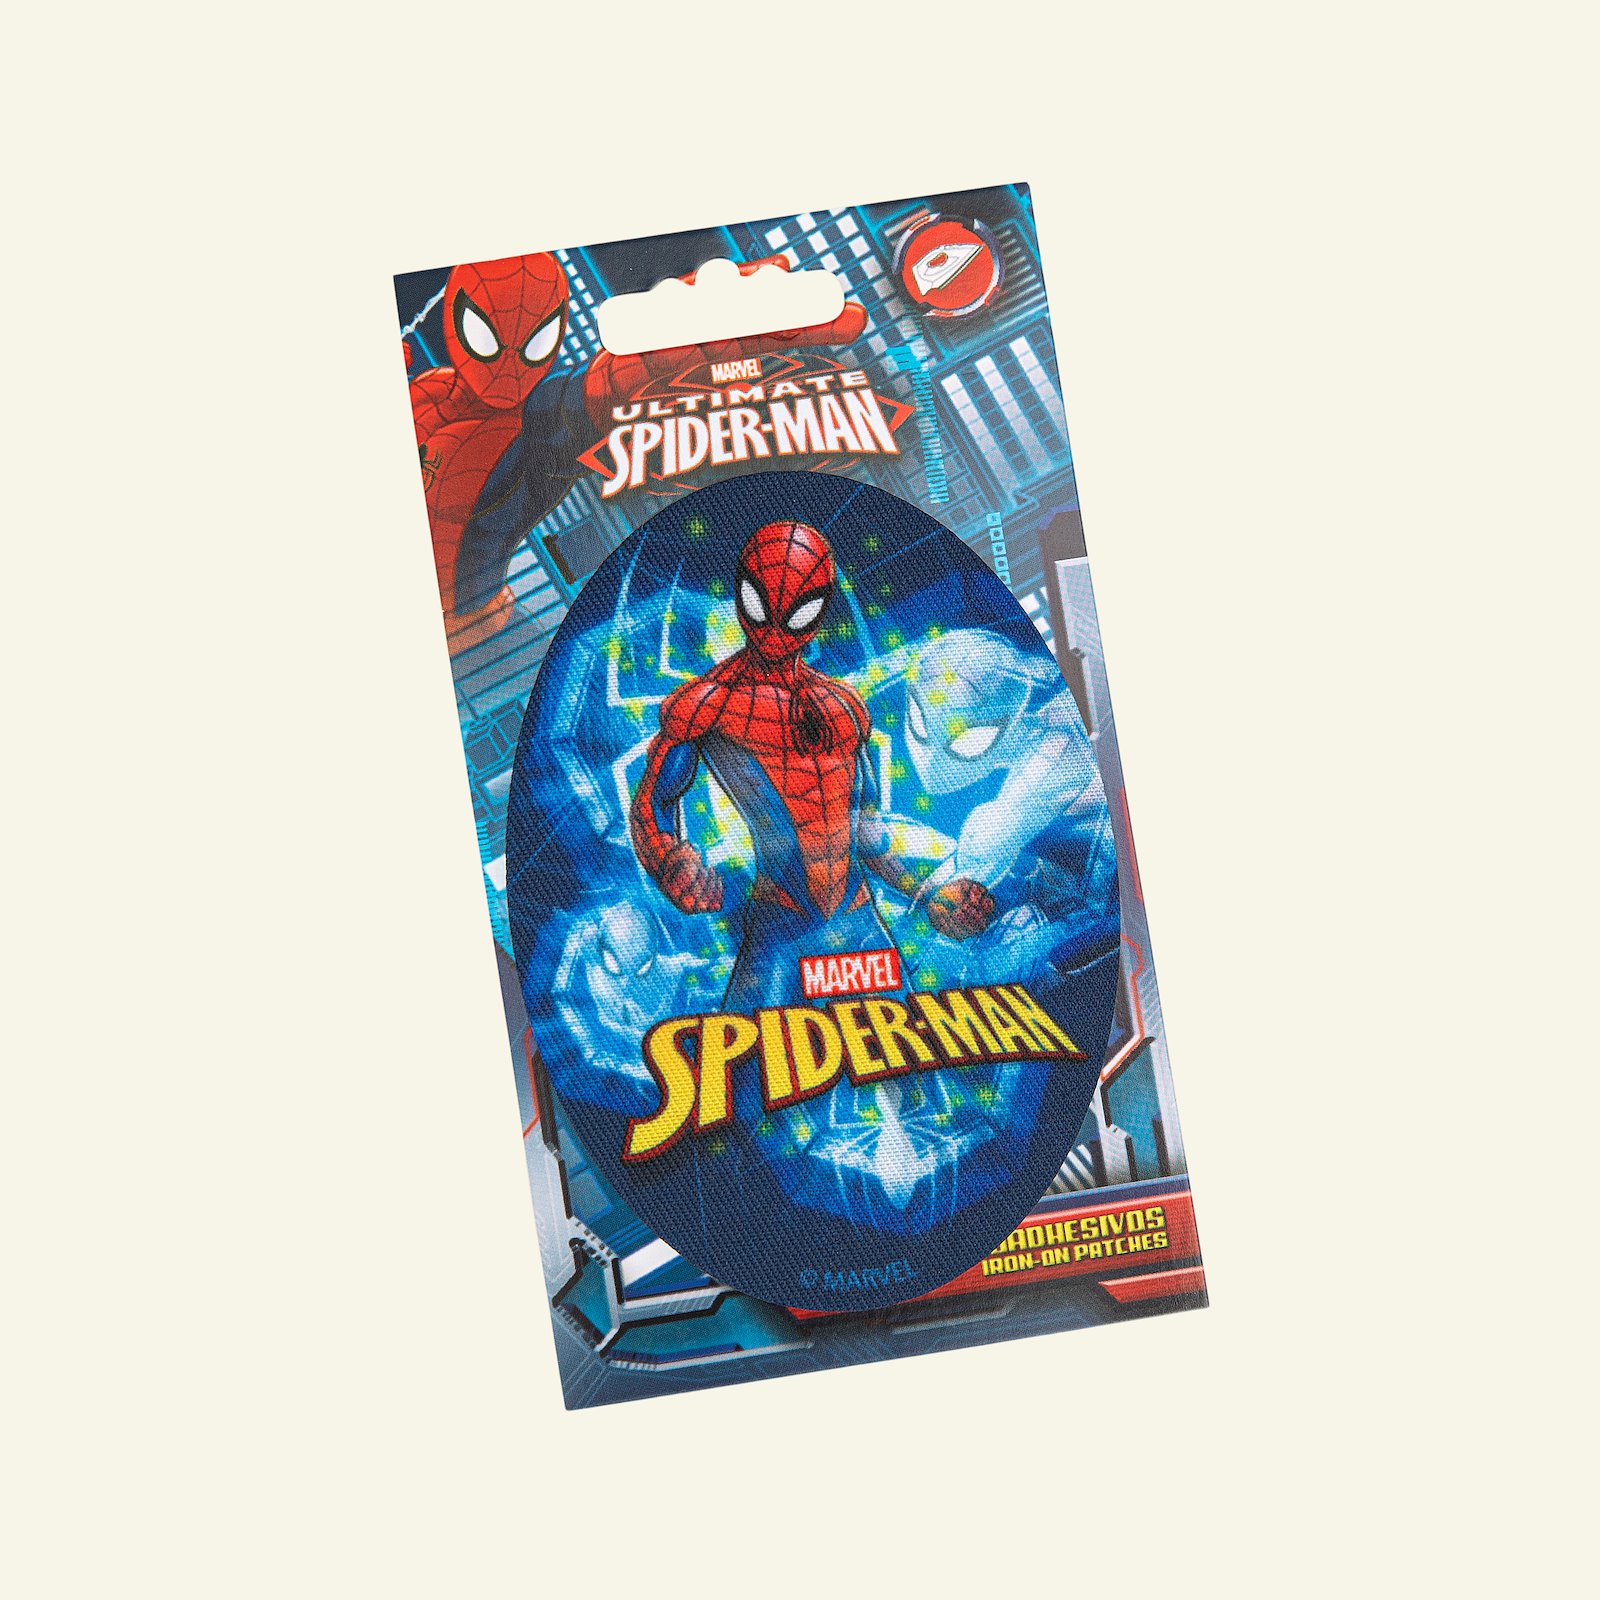 Patch Spiderman 110x80mm blue/red 1pcs 24951_pack_b